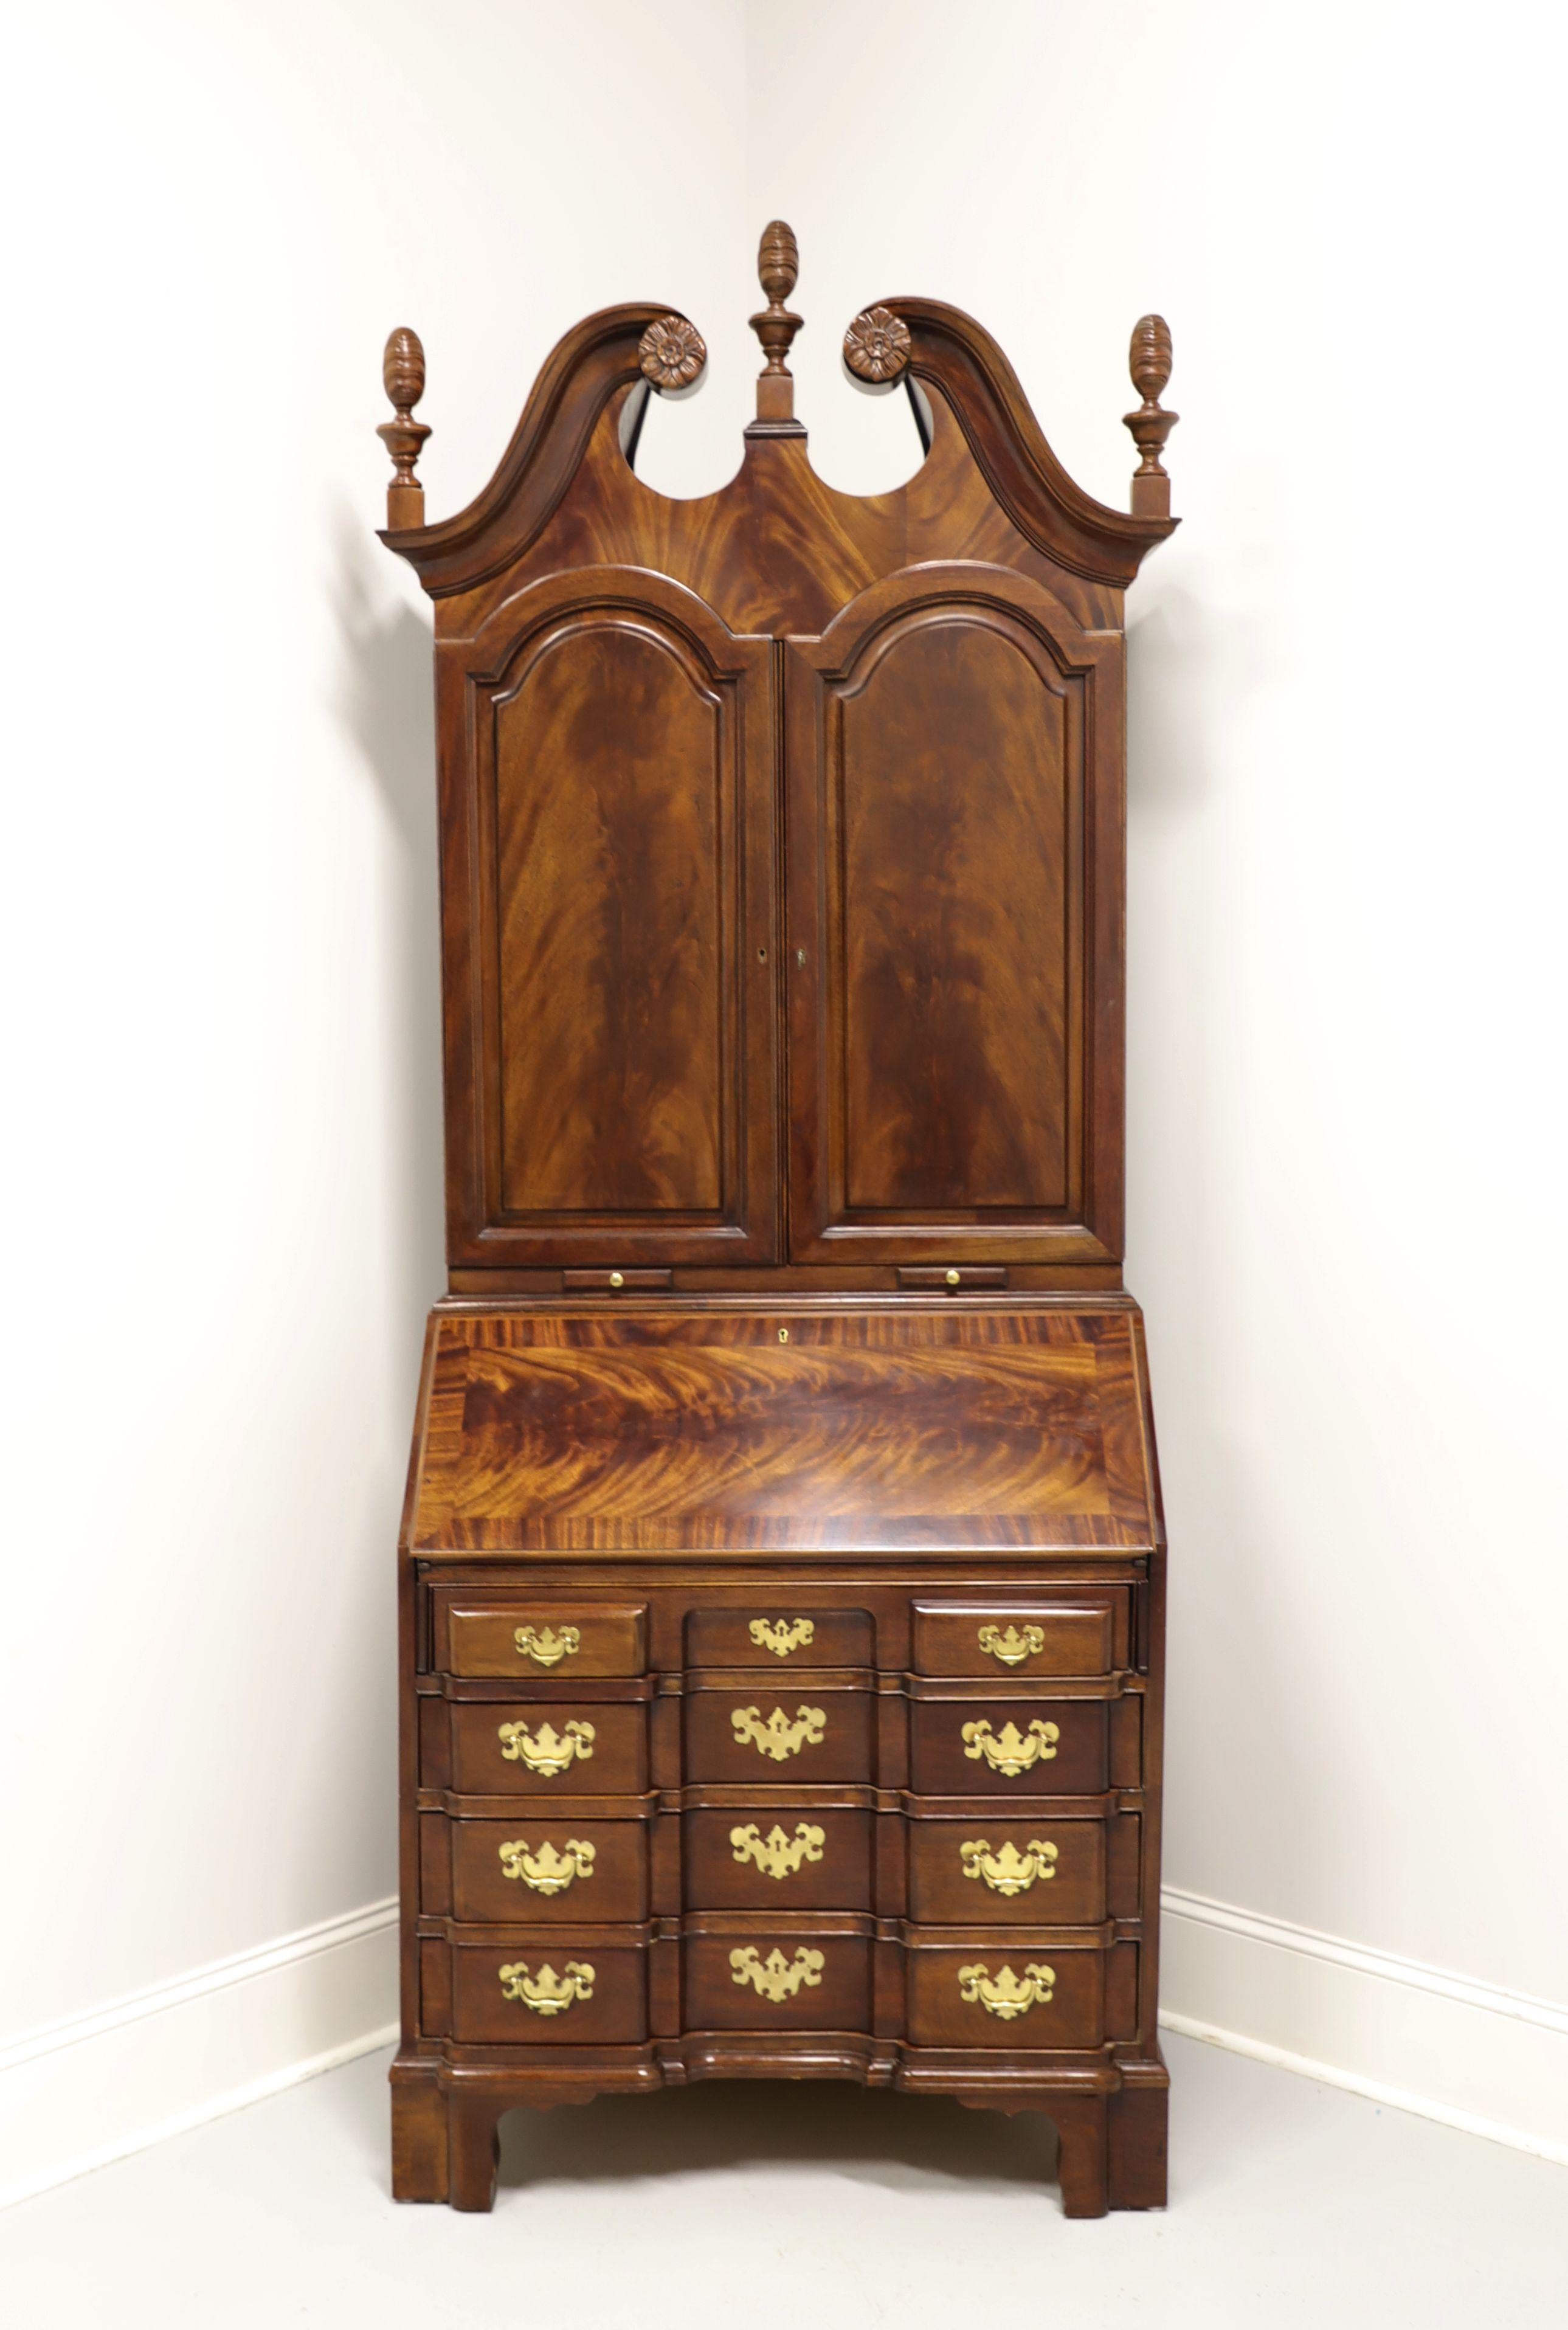 A Chippendale style secretary desk by Tomlinson. Crotch mahogany with brass hardware, pediment top with three finials and bracket feet. Upper blind bookcase has two lockable doors that reveal two adjustable wood shelves and two pull out candle